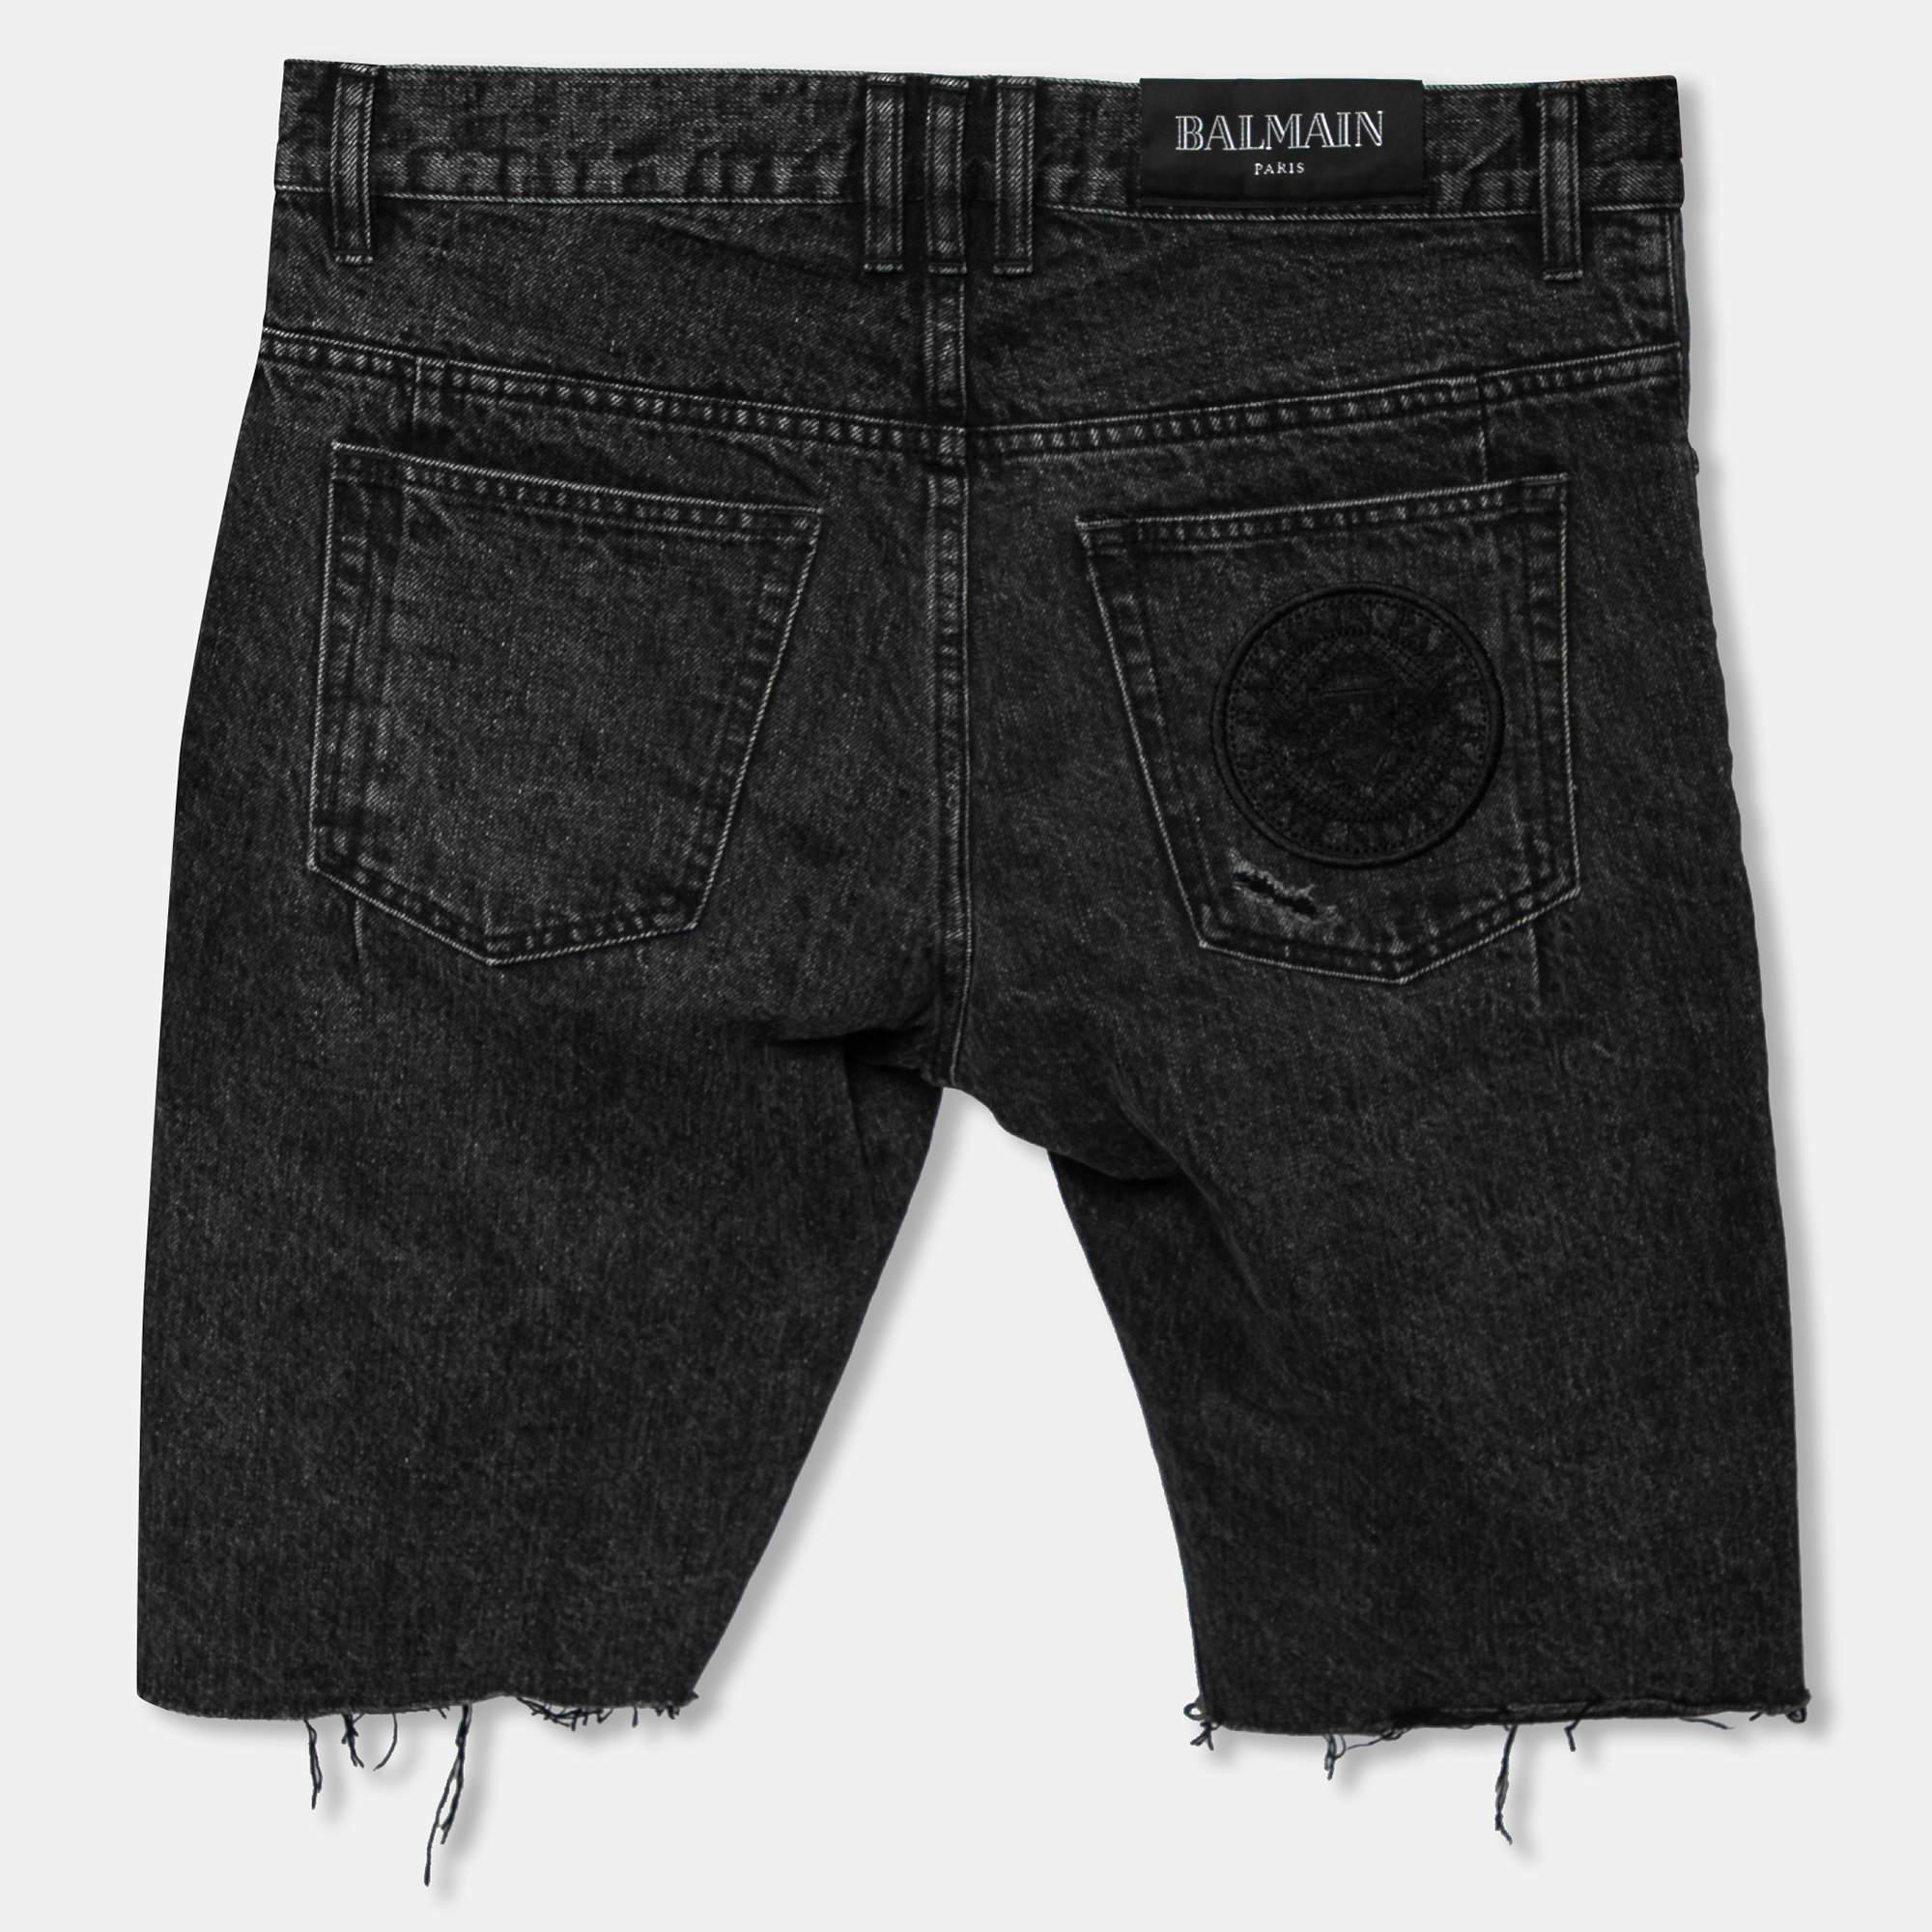 An edgy pair of shorts to add to your wardrobe is this grey one from Balmain. Made from comfortable cotton, these shorts feature a distressed design, frayed edges on the hems, a buttoned closure, and external pockets.

